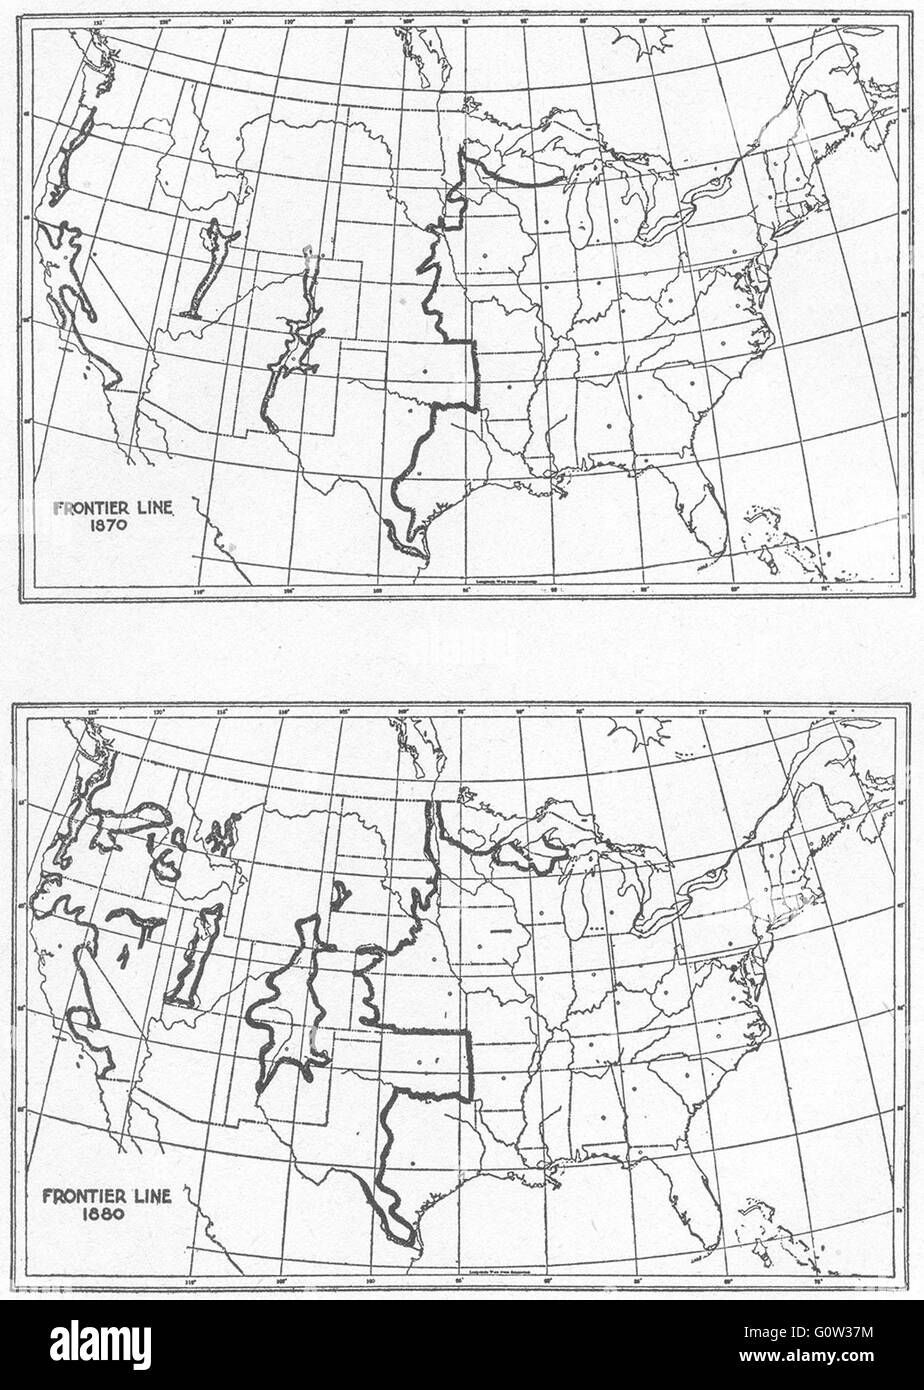 USA: Frontier Line 1870; Frontier Line 1880, sketch map, 1942 Stock Photo